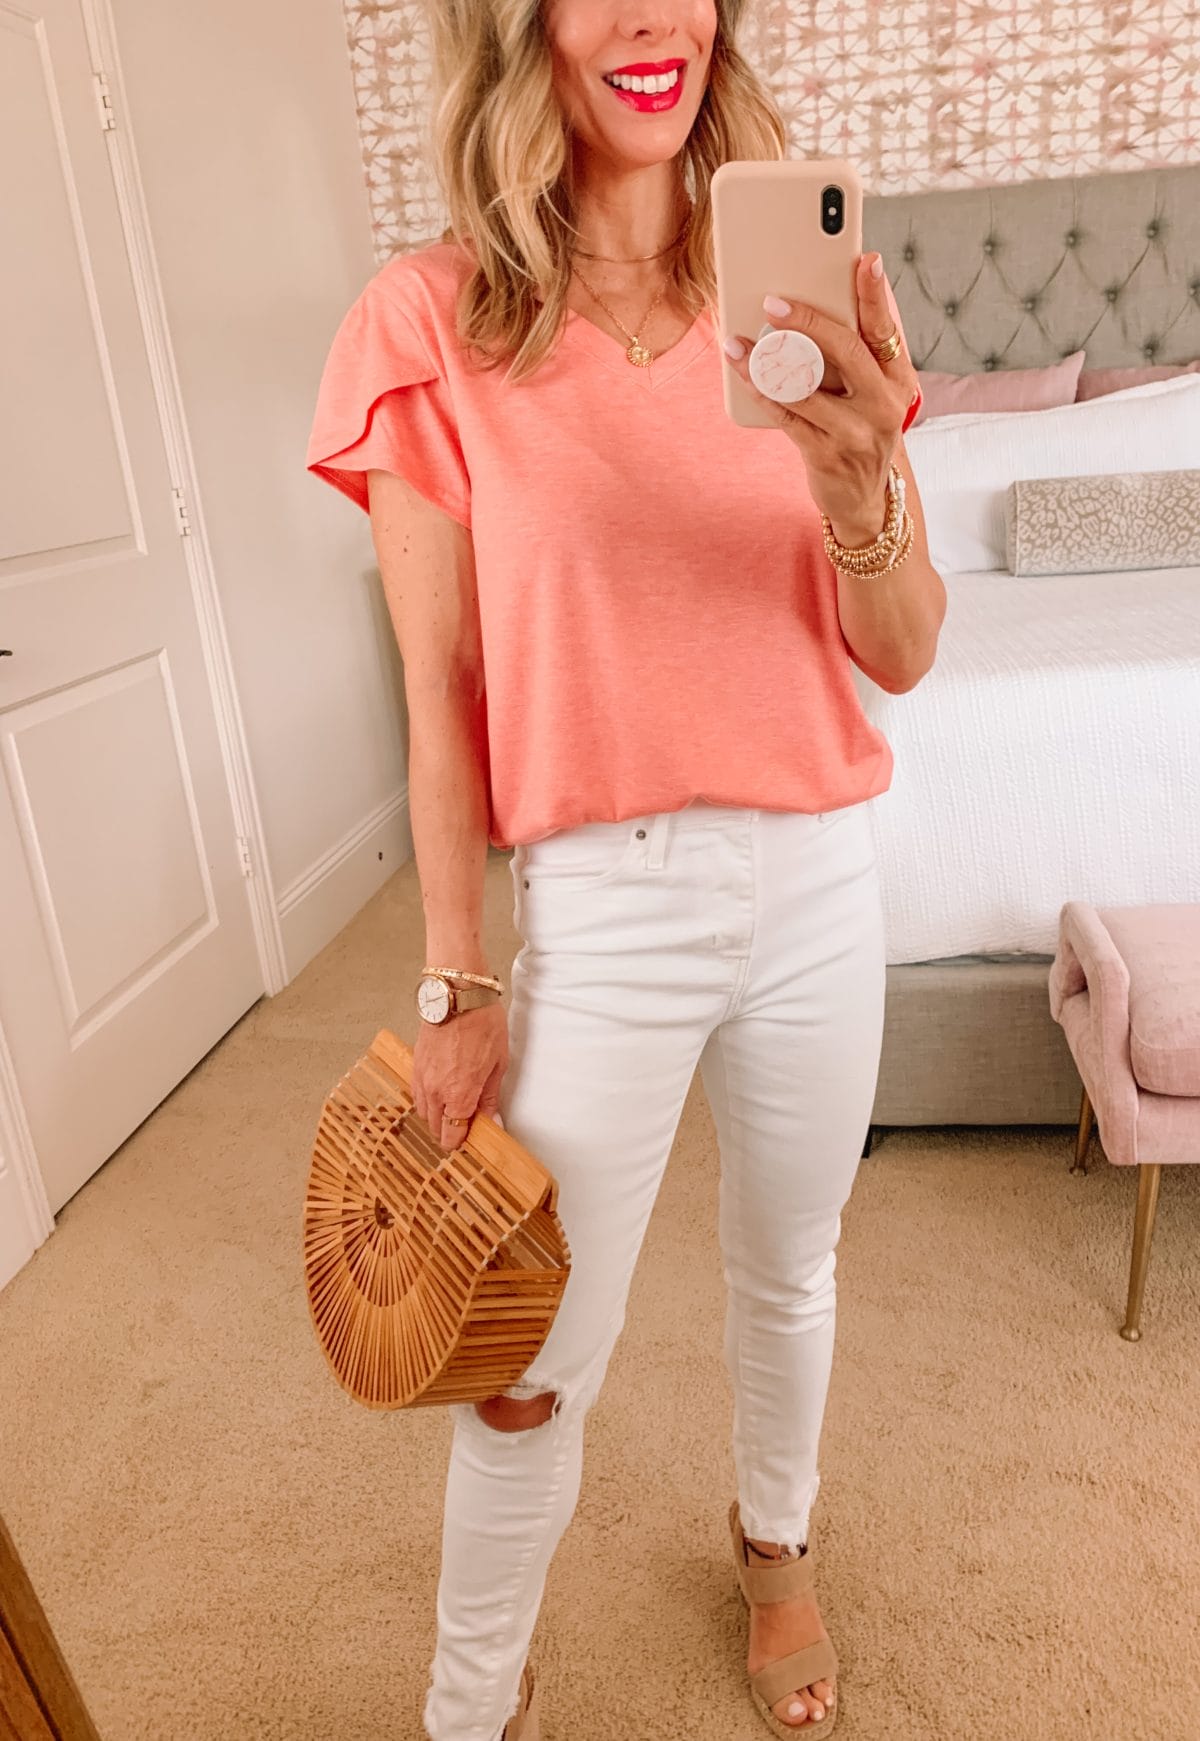 Amazon Fashion Faves, Petal Sleeve Tee, white jeans, Wedges, Clutch 